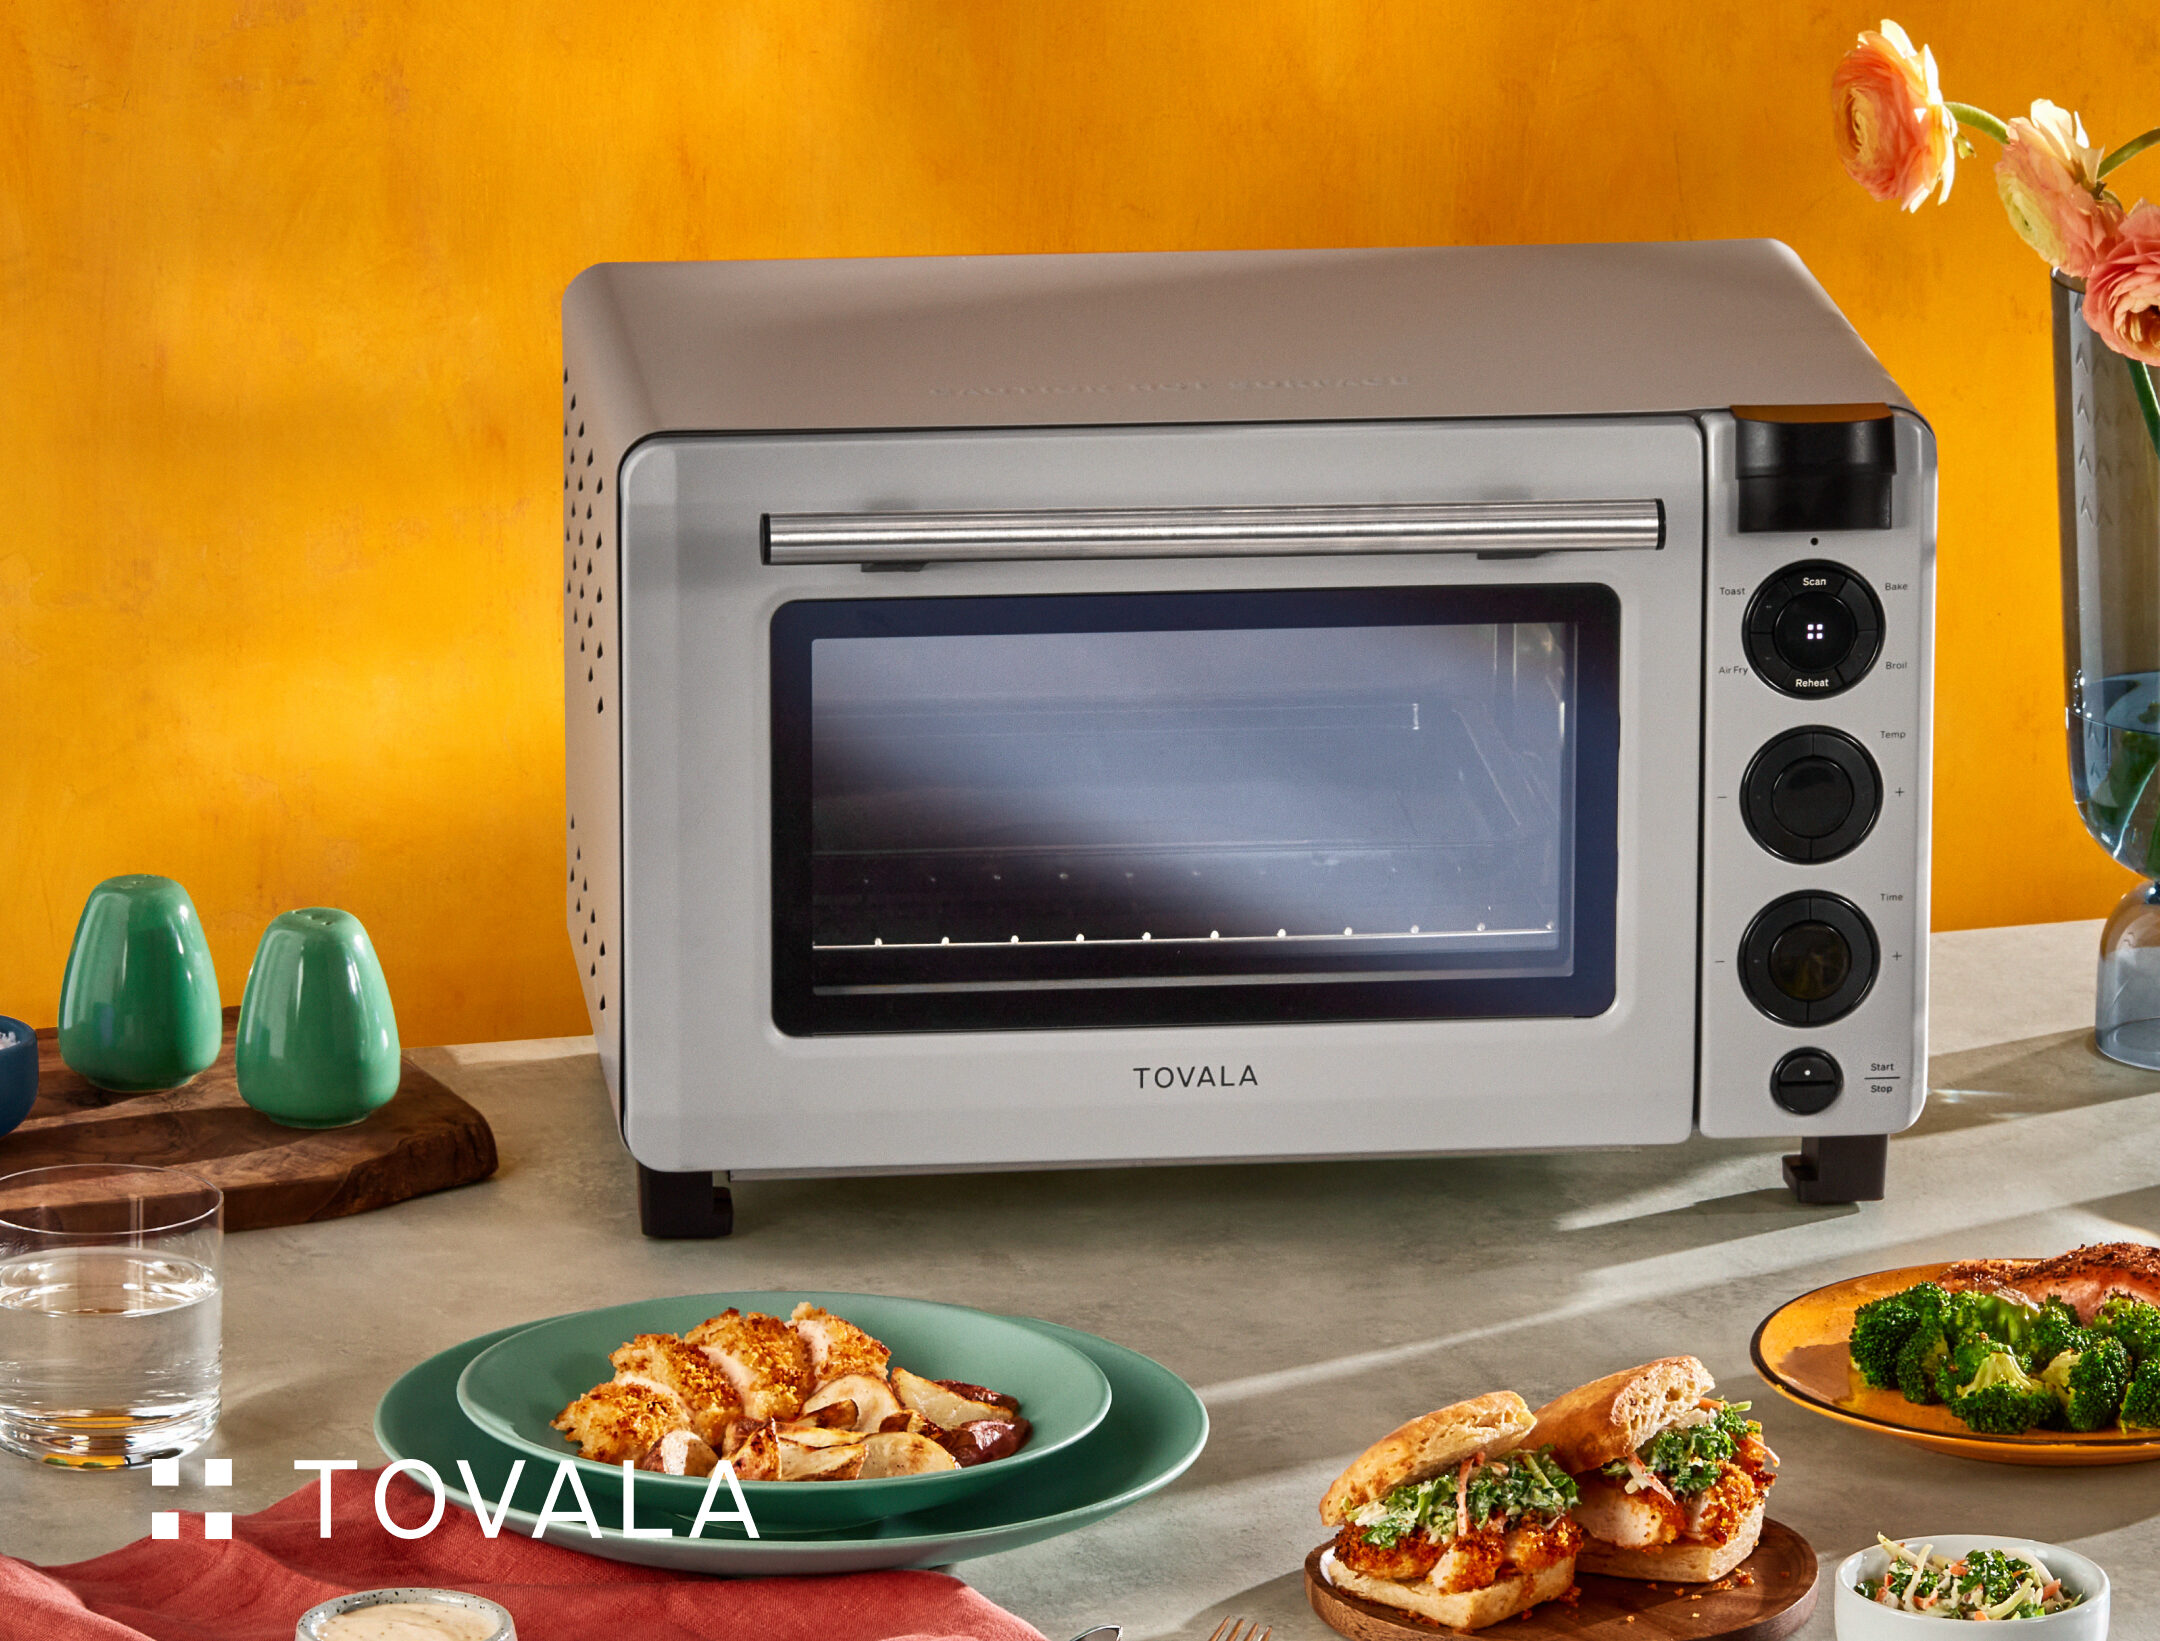 5 Reasons This Is the (Smart) Oven Of Your Dreams